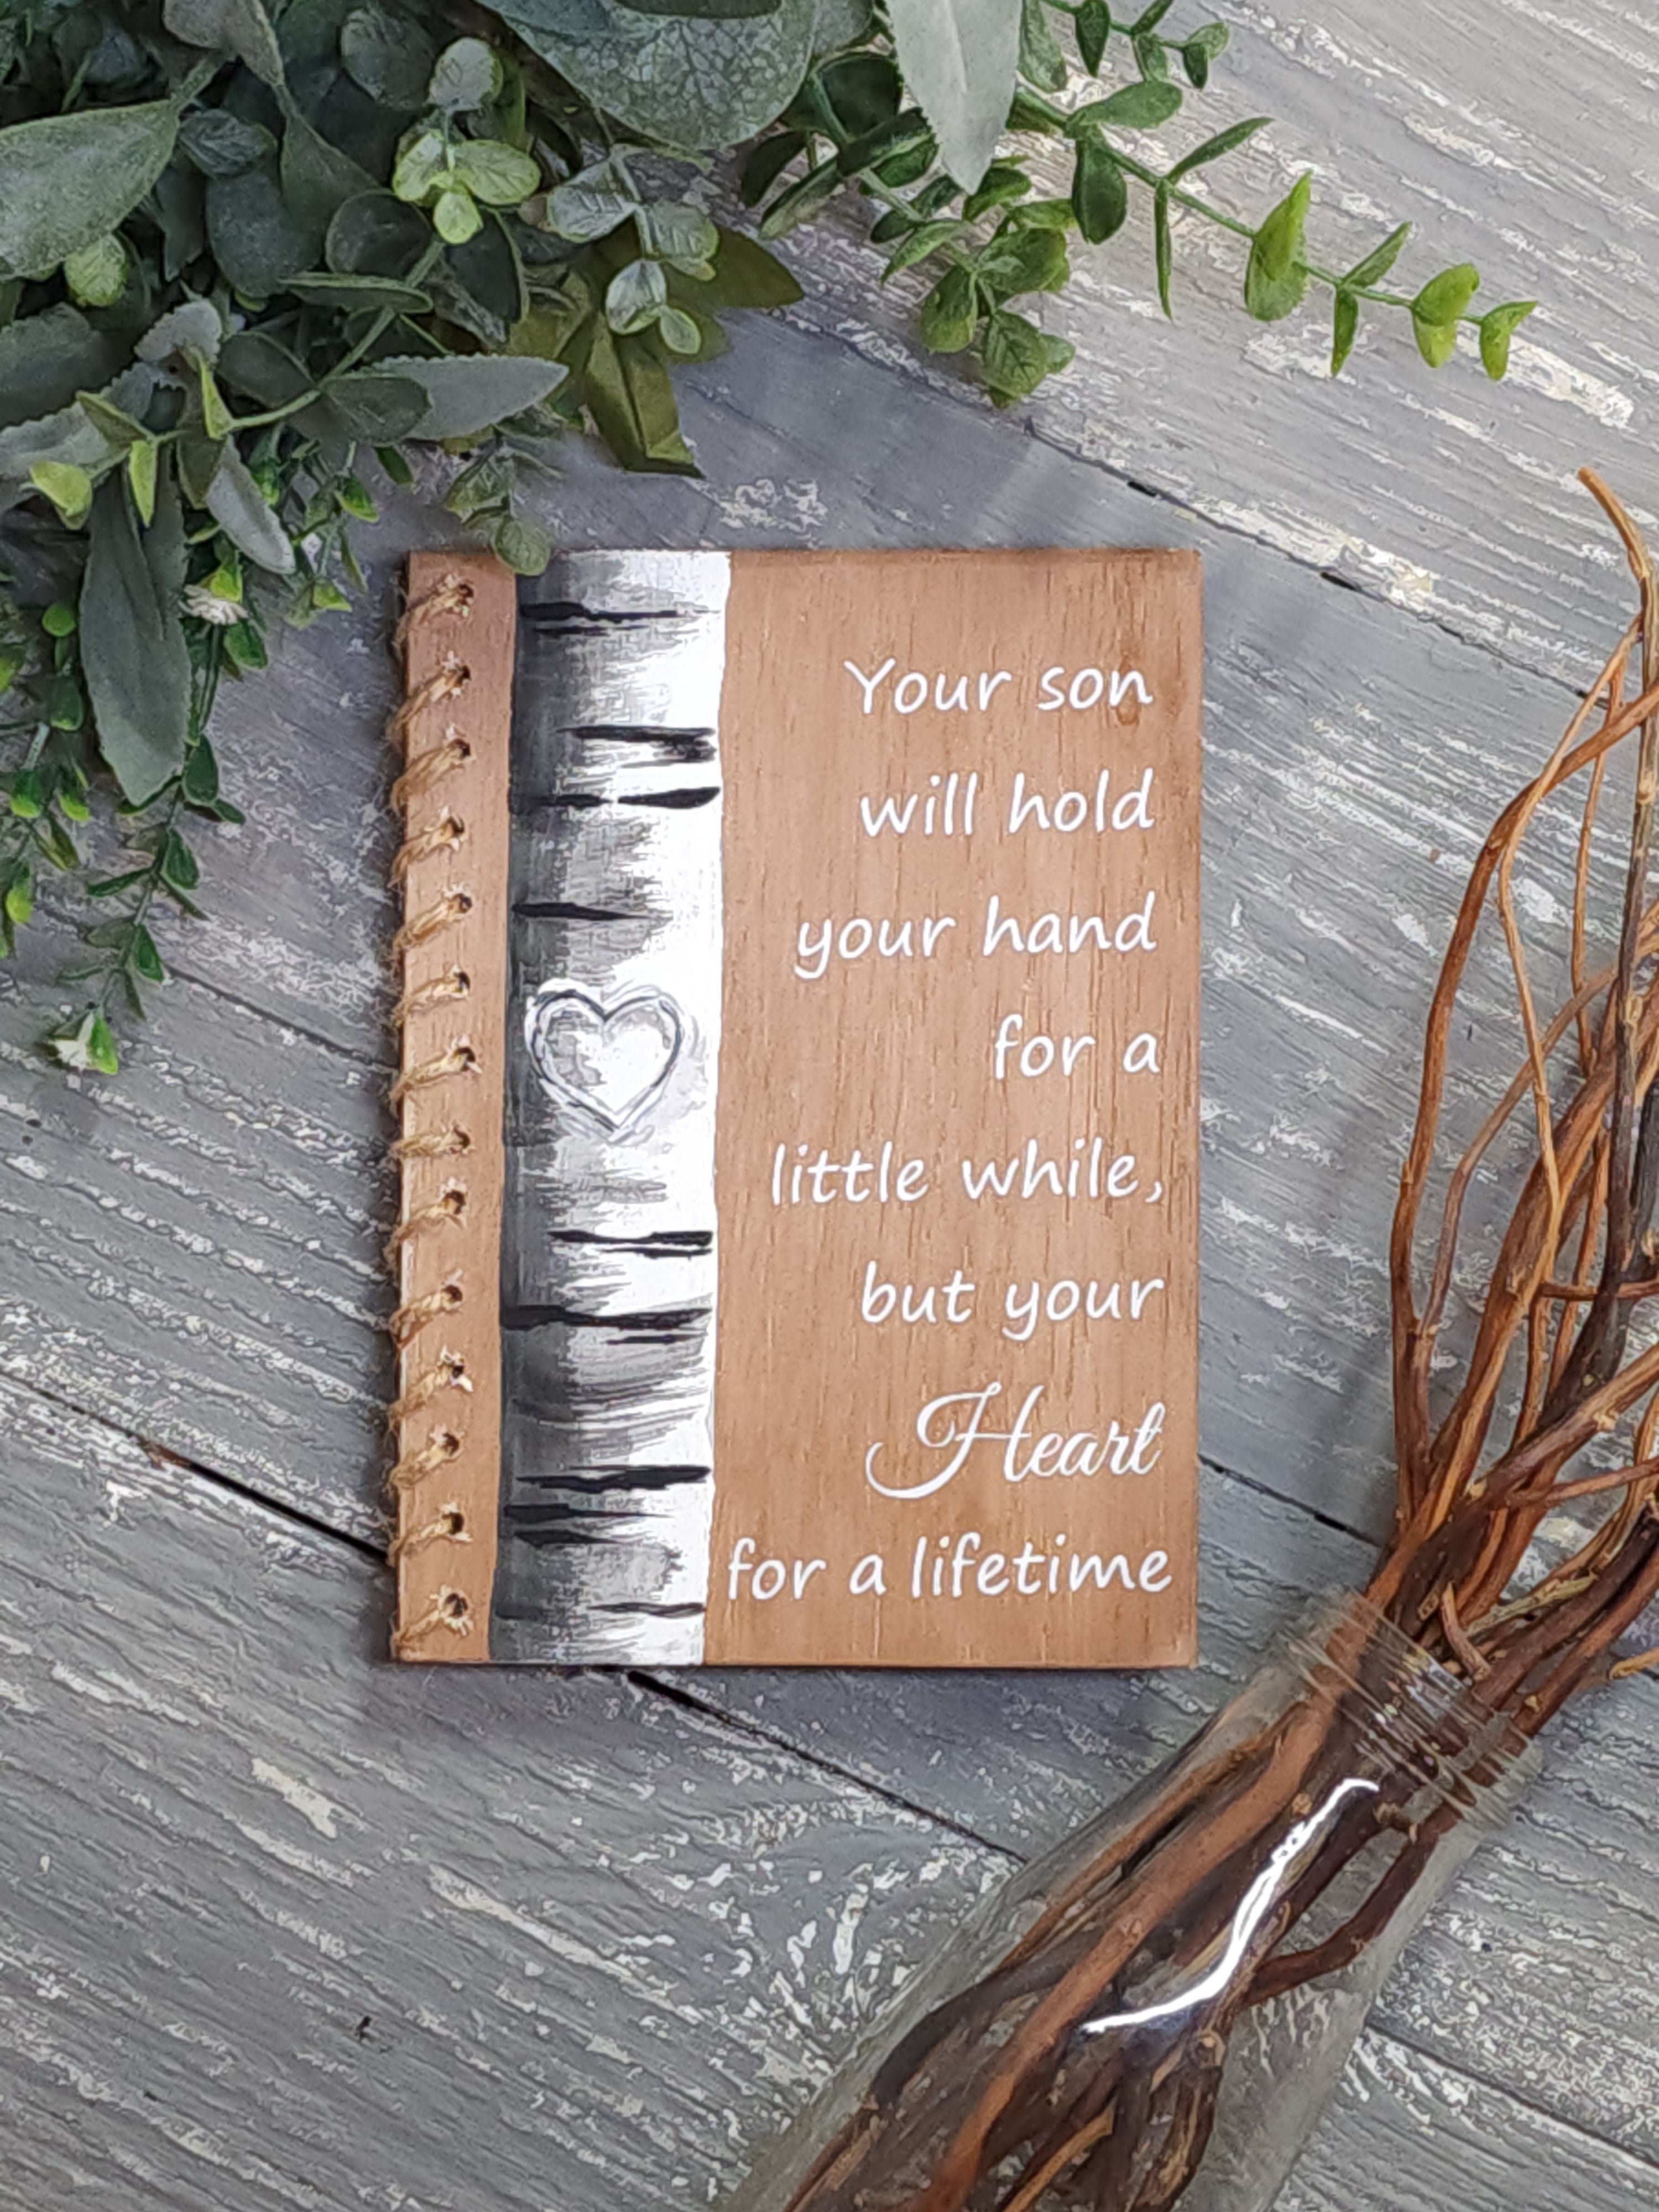 Handpainted greeting cards, Mothers Day gift, card for mom, custom note card with Easel stand, artwork display stand, Son hold your hand